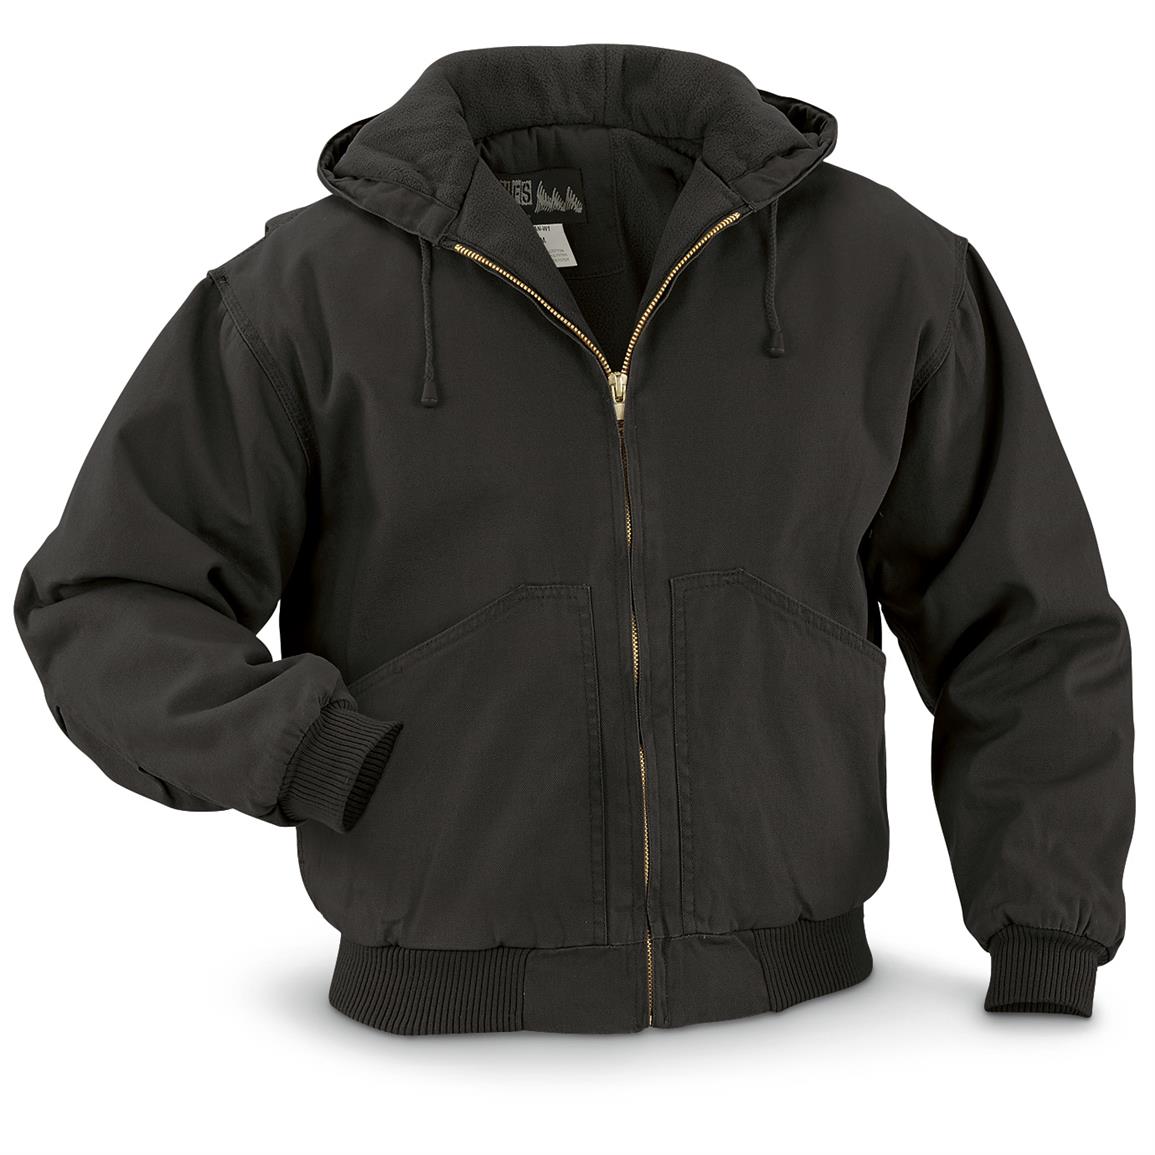 WFS Men's Canvas Insulated Jacket - 649039, Insulated Jackets & Coats